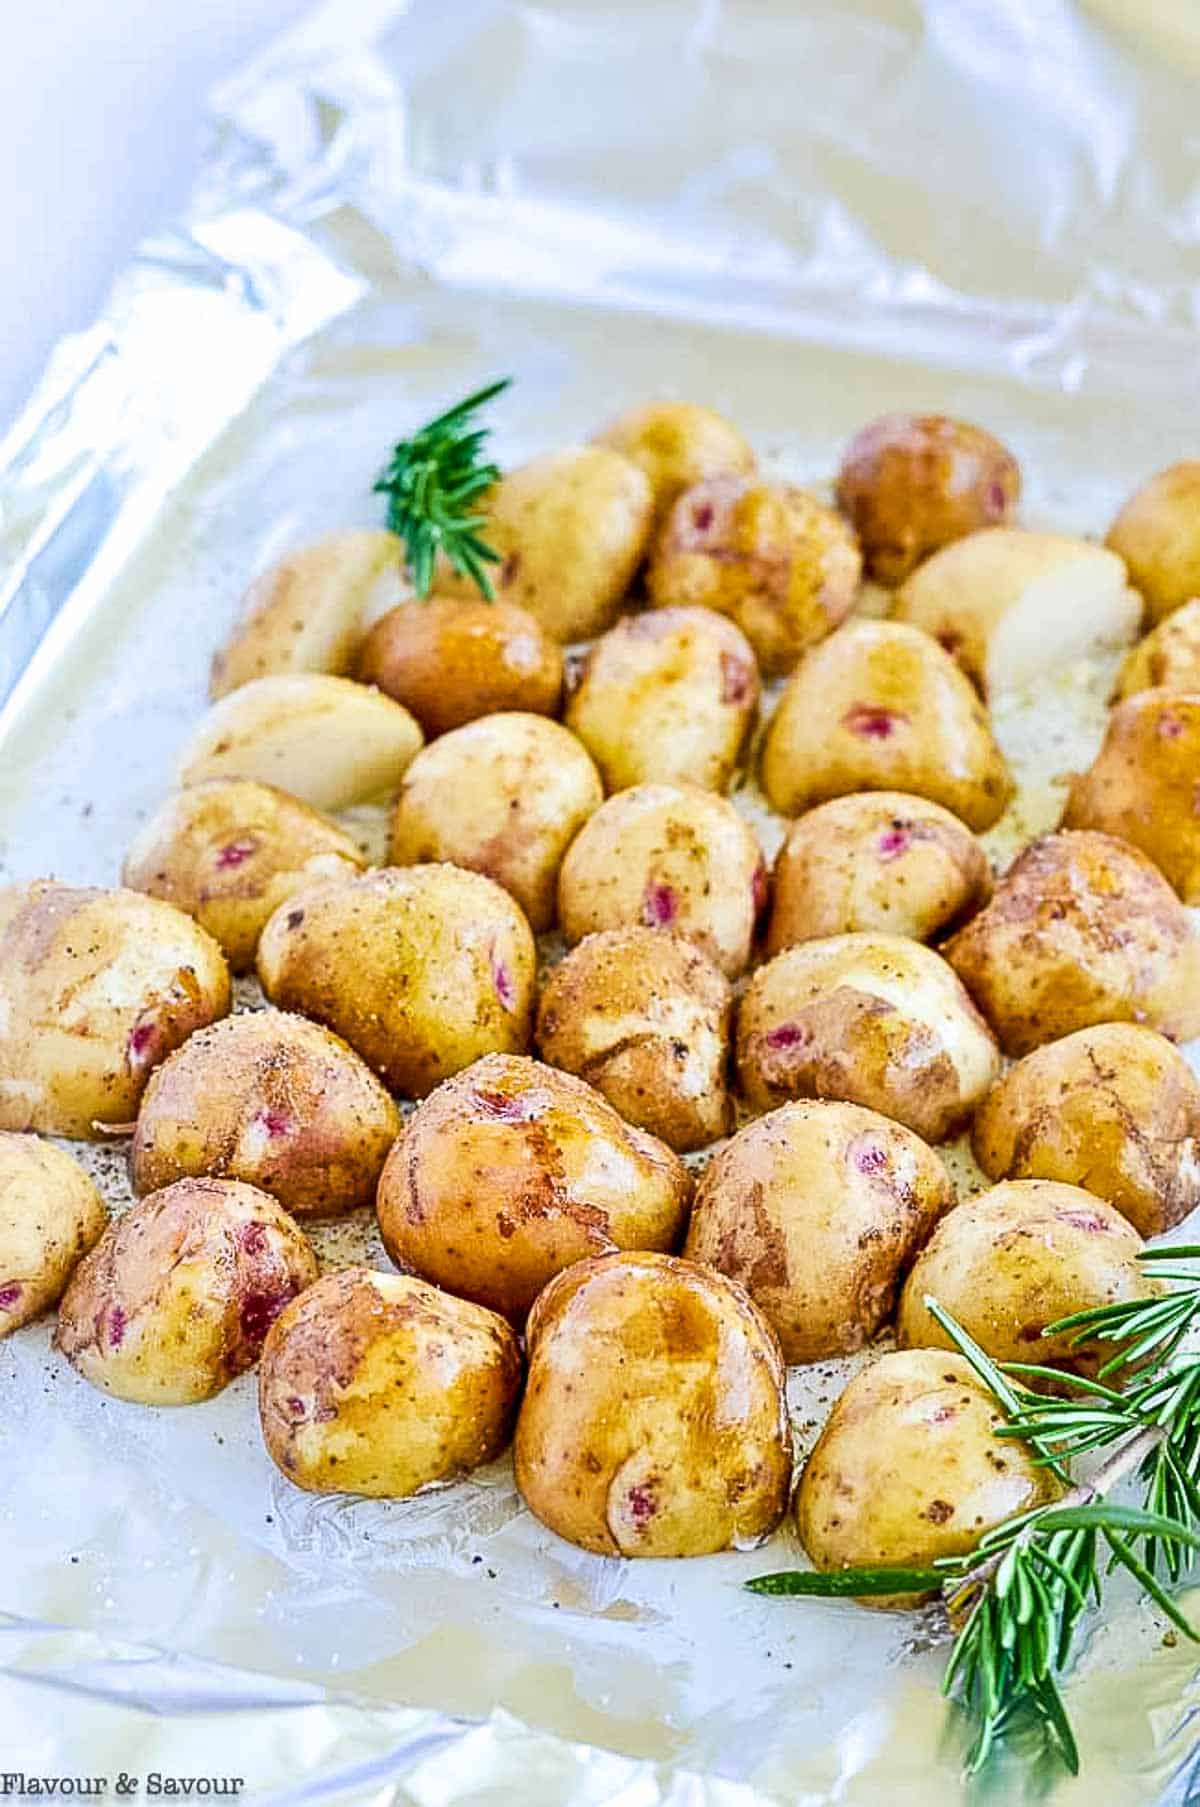 Baby potatoes on a sheet of aluminum foil.